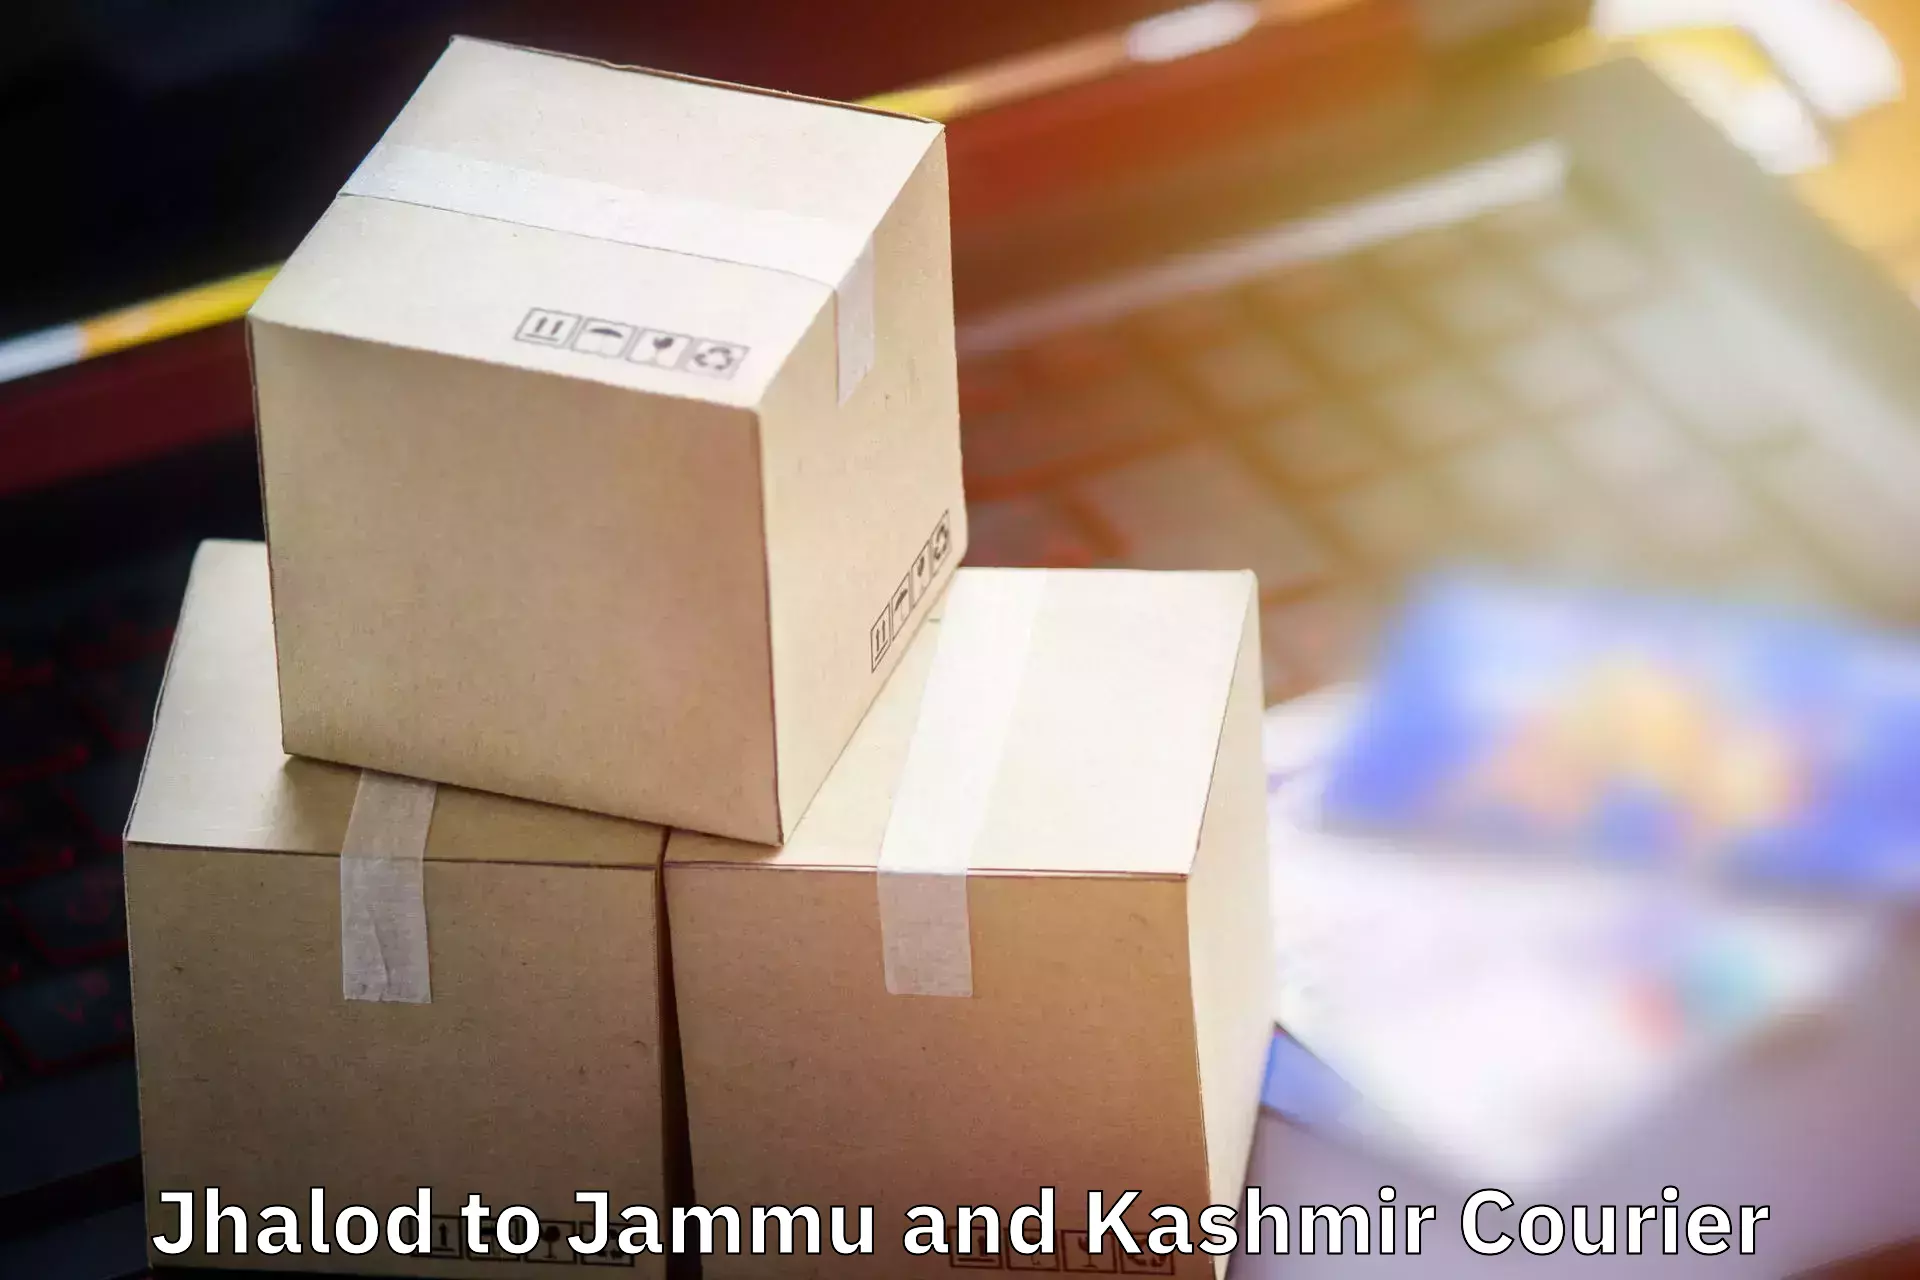 Personal effects shipping Jhalod to Leh